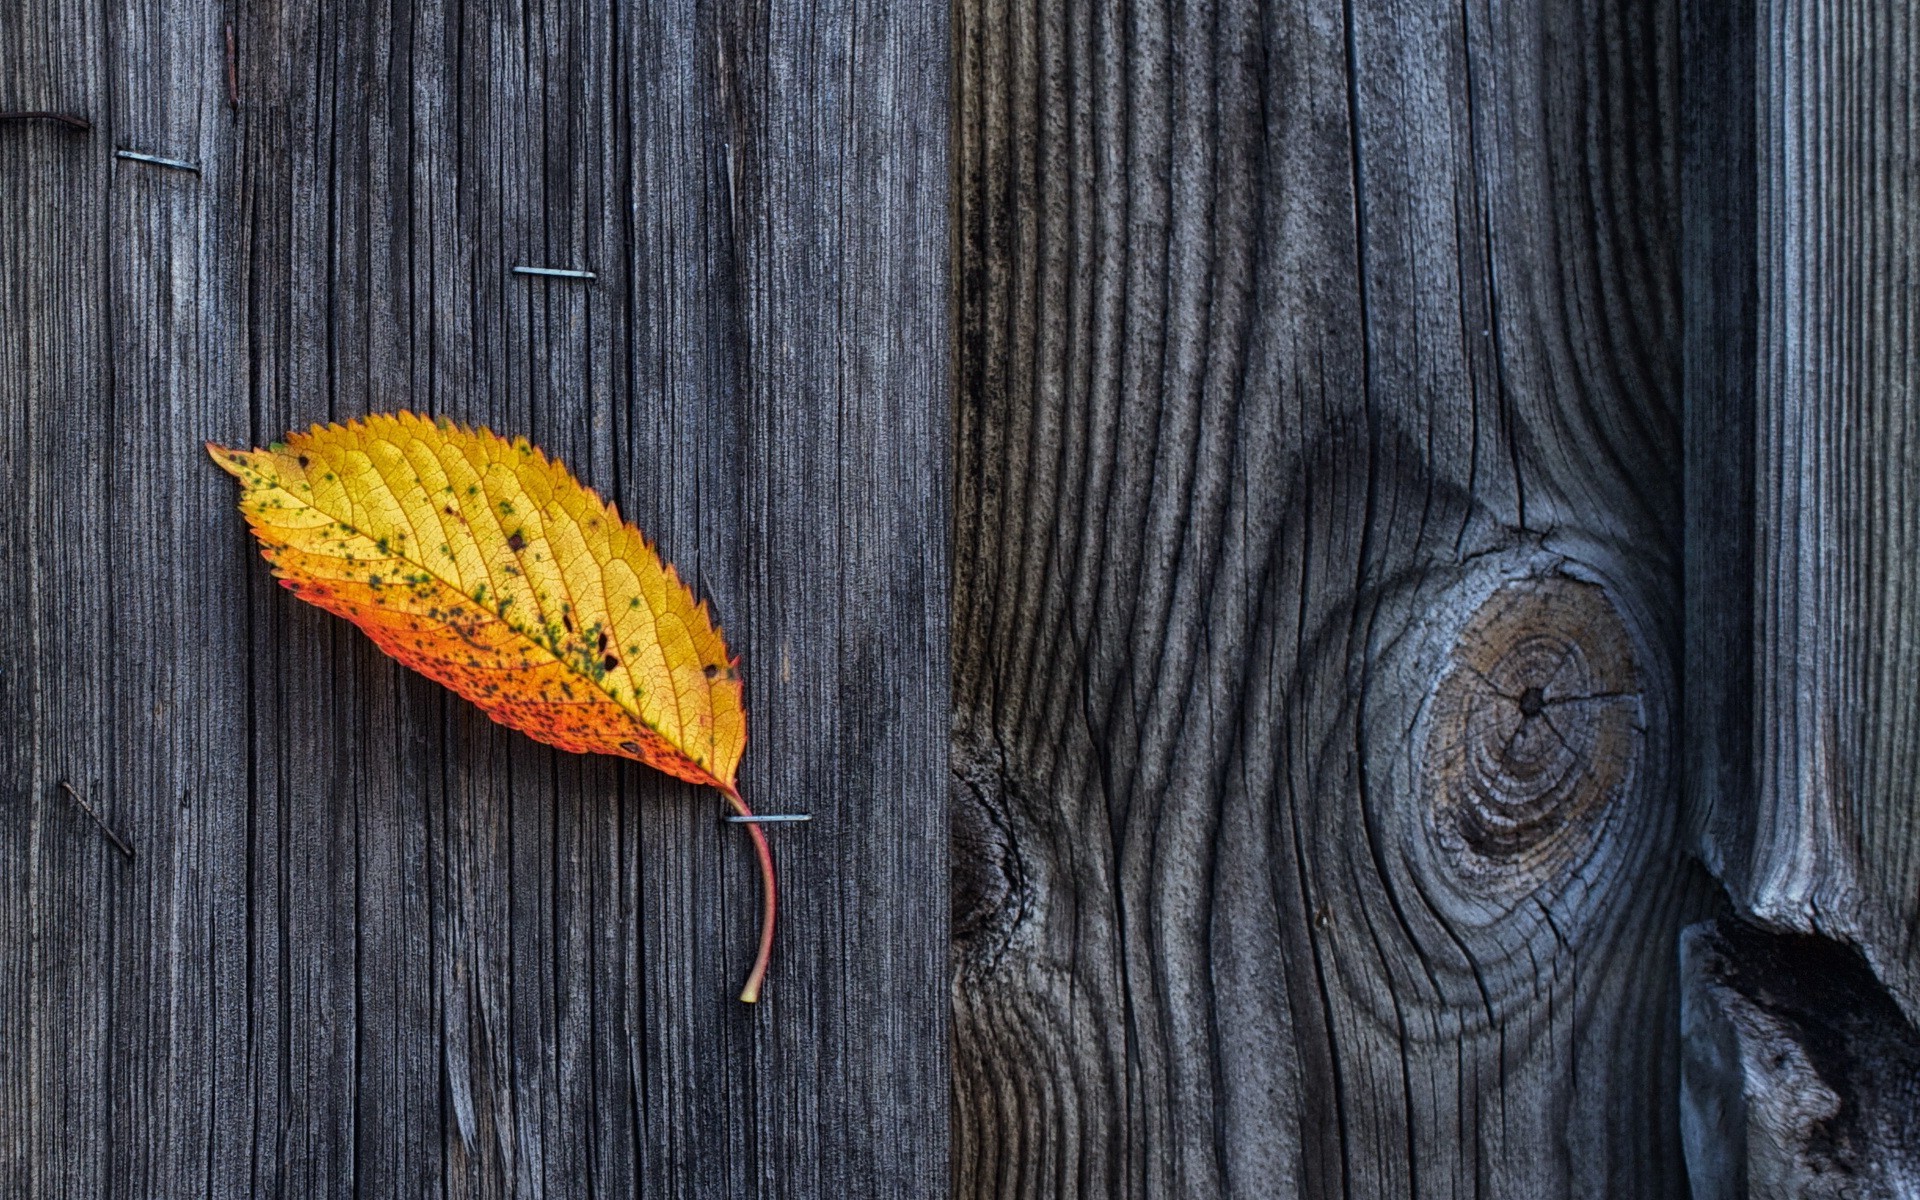 nature, Wooden Surface, Wood, Texture, Pattern, Fall, Leaves Wallpaper